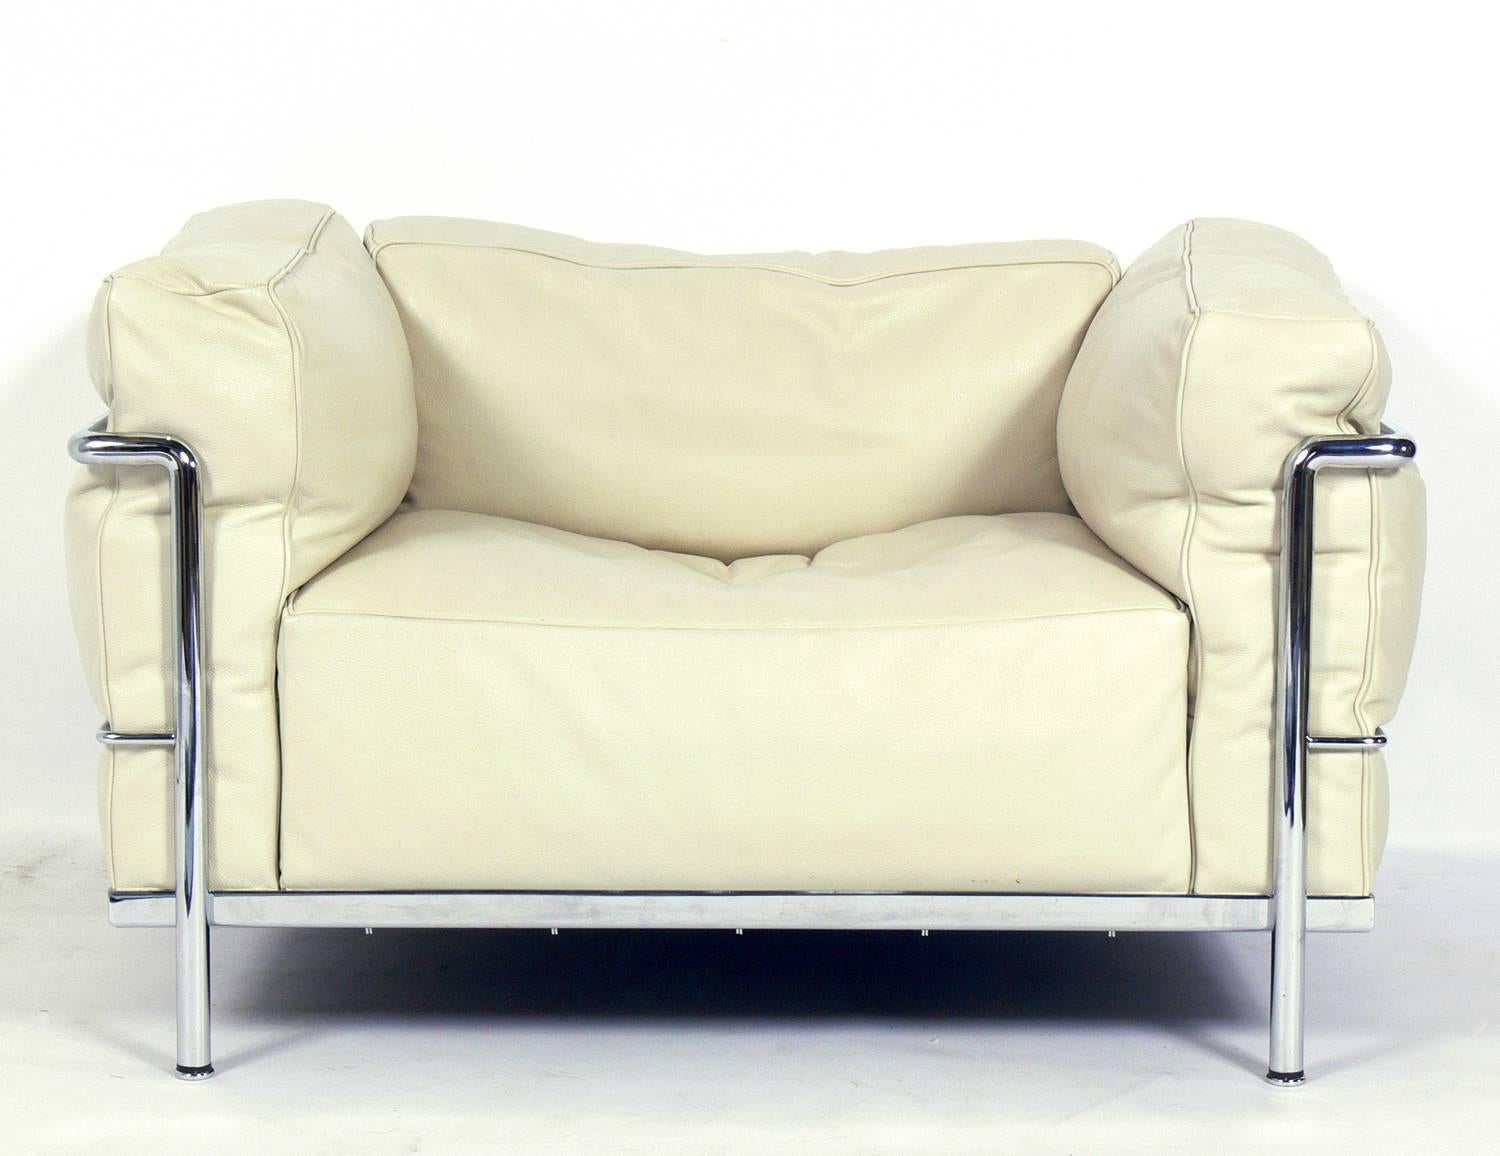 Modern LC3 grand comfort leather lounge chair, designed by Le Corbusier for Cassina, Italian, circa 2000s. Nearly new condition with the original ivory color leather cushions.